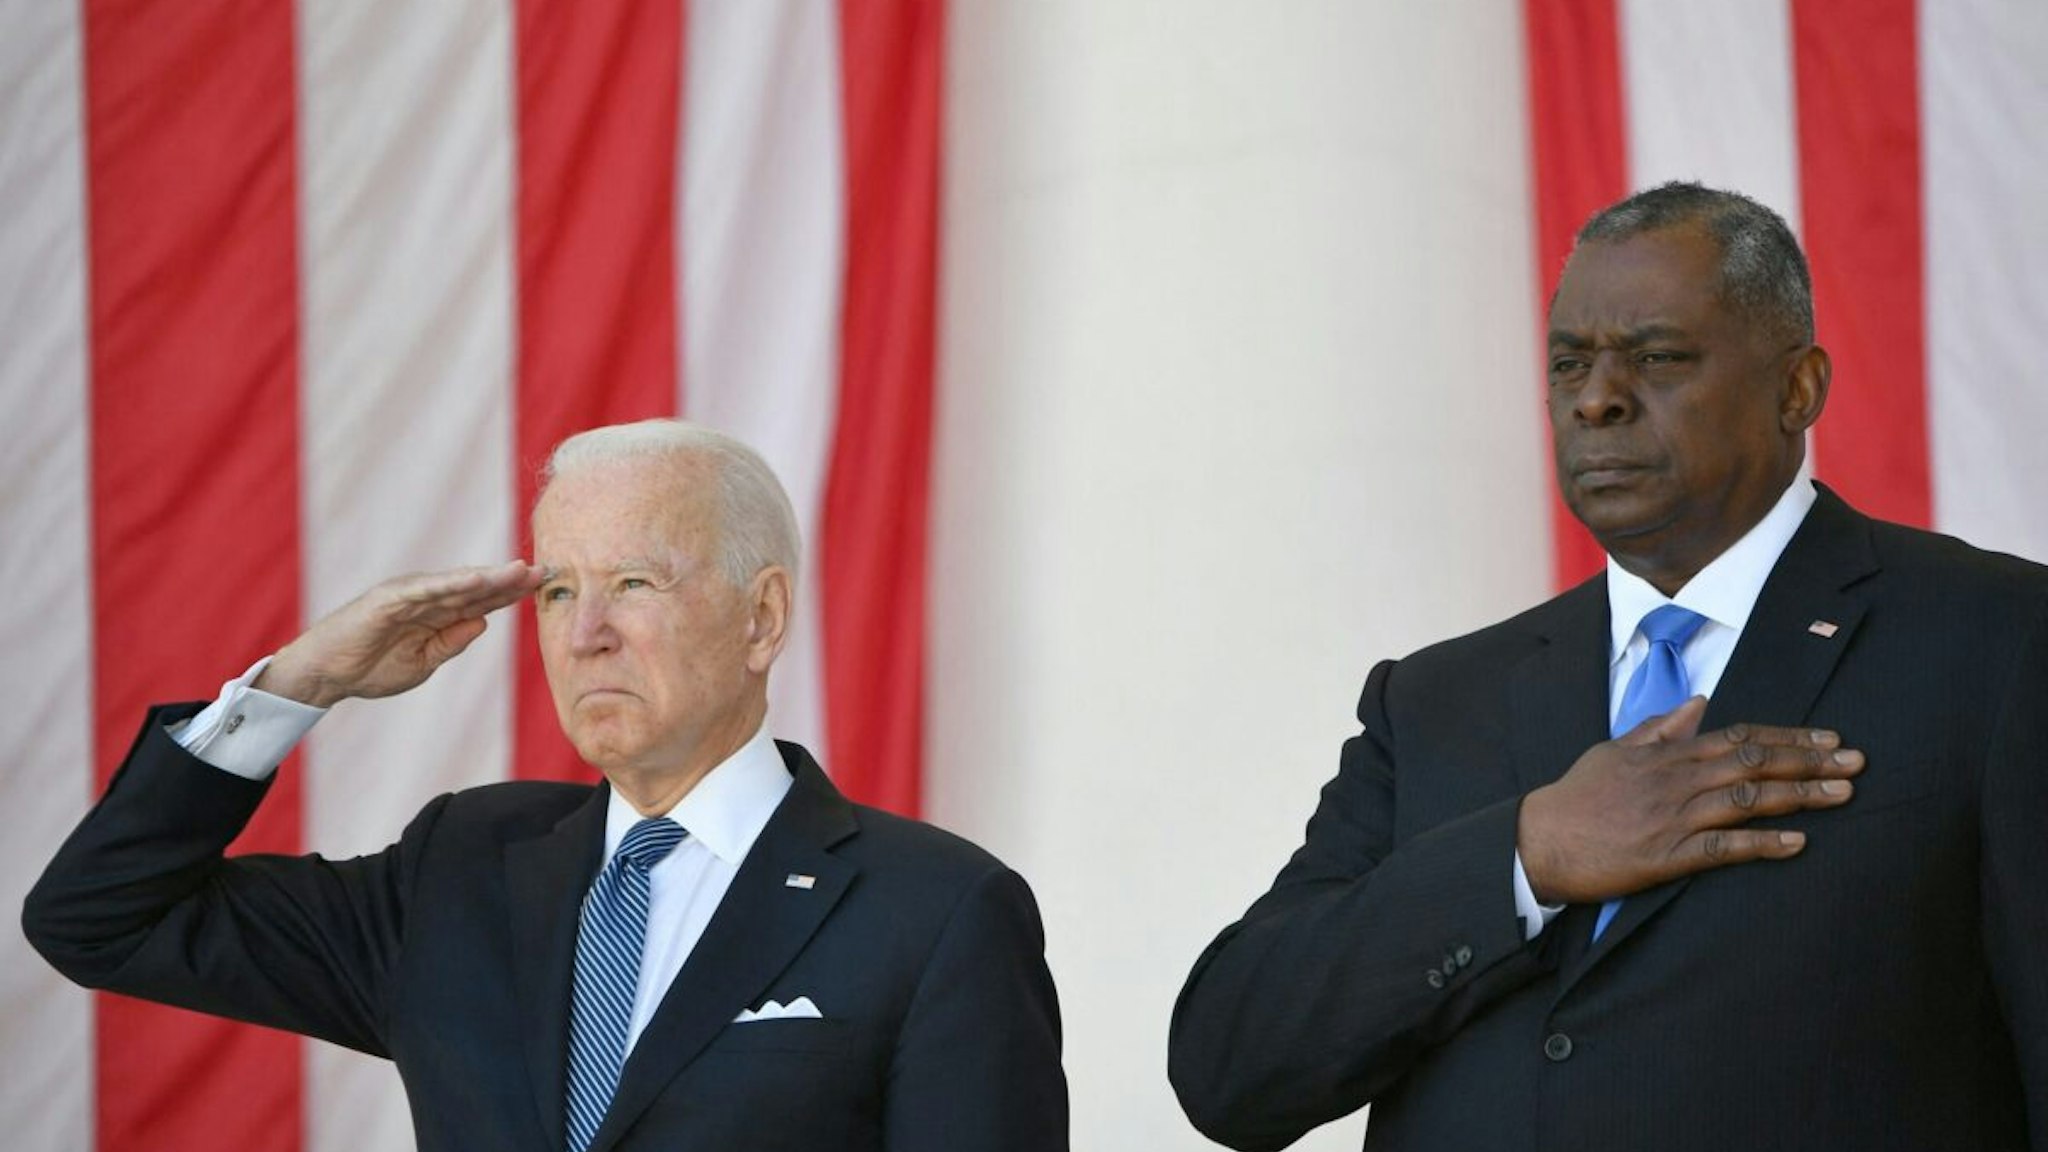 US President Joe Biden(L) salutes along with Secretary of Defense Lloyd Austin before delivering an address at the 153rd National Memorial Day Observance at Arlington National Cemetery on Memorial Day in Arlington, Virginia on May 31, 2021.